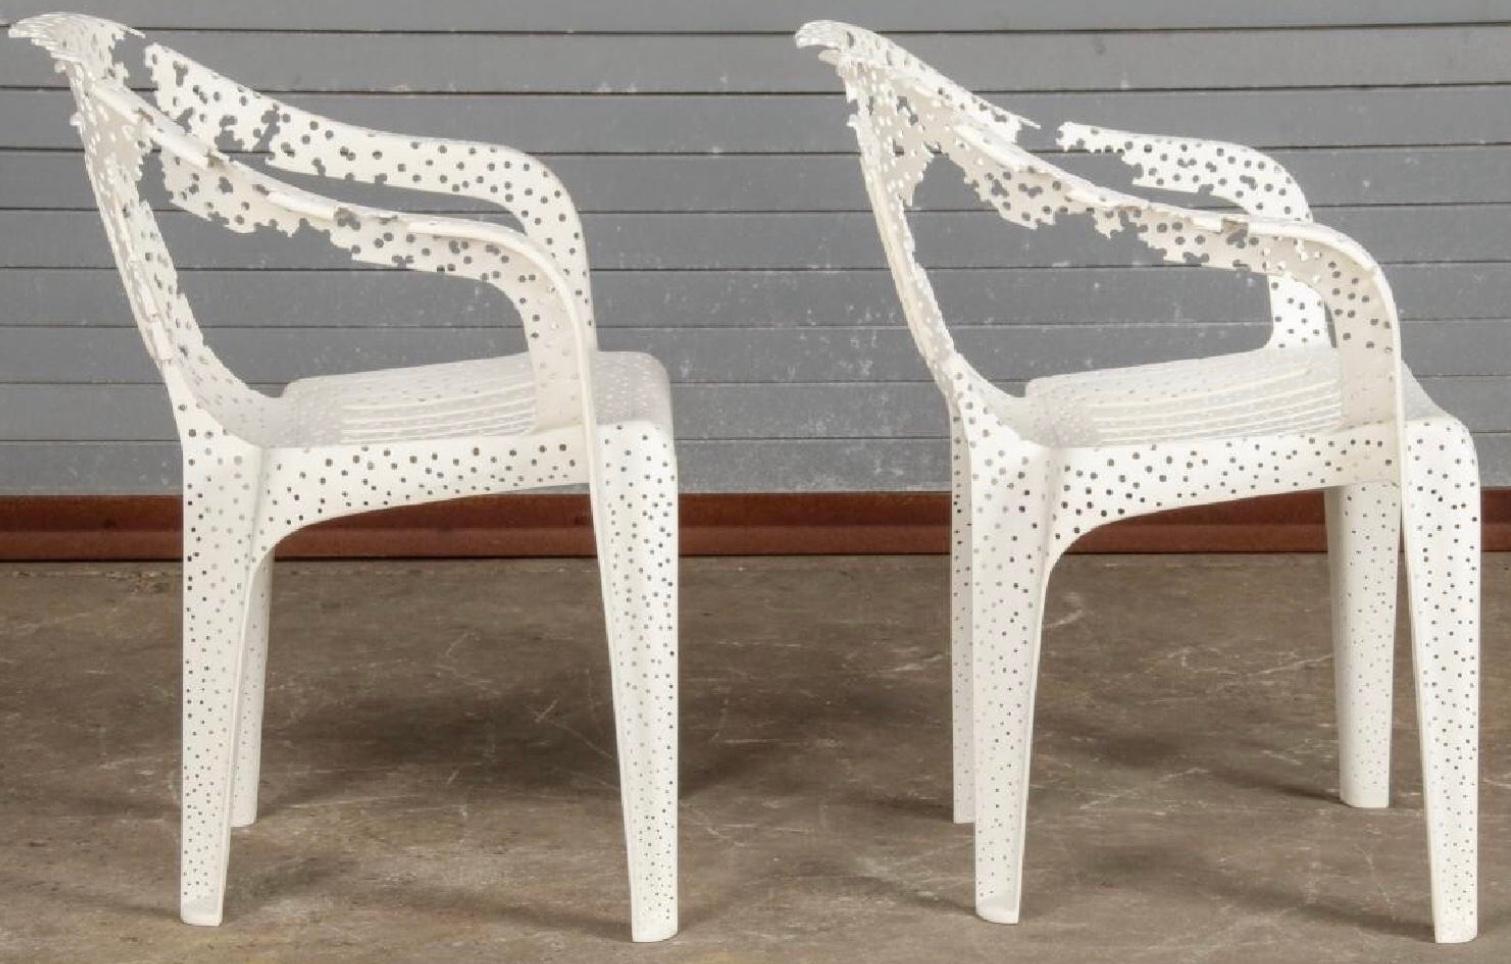 Vintage minimal white Avant-Garde garden chair set by Magnani for re-sign Italy

